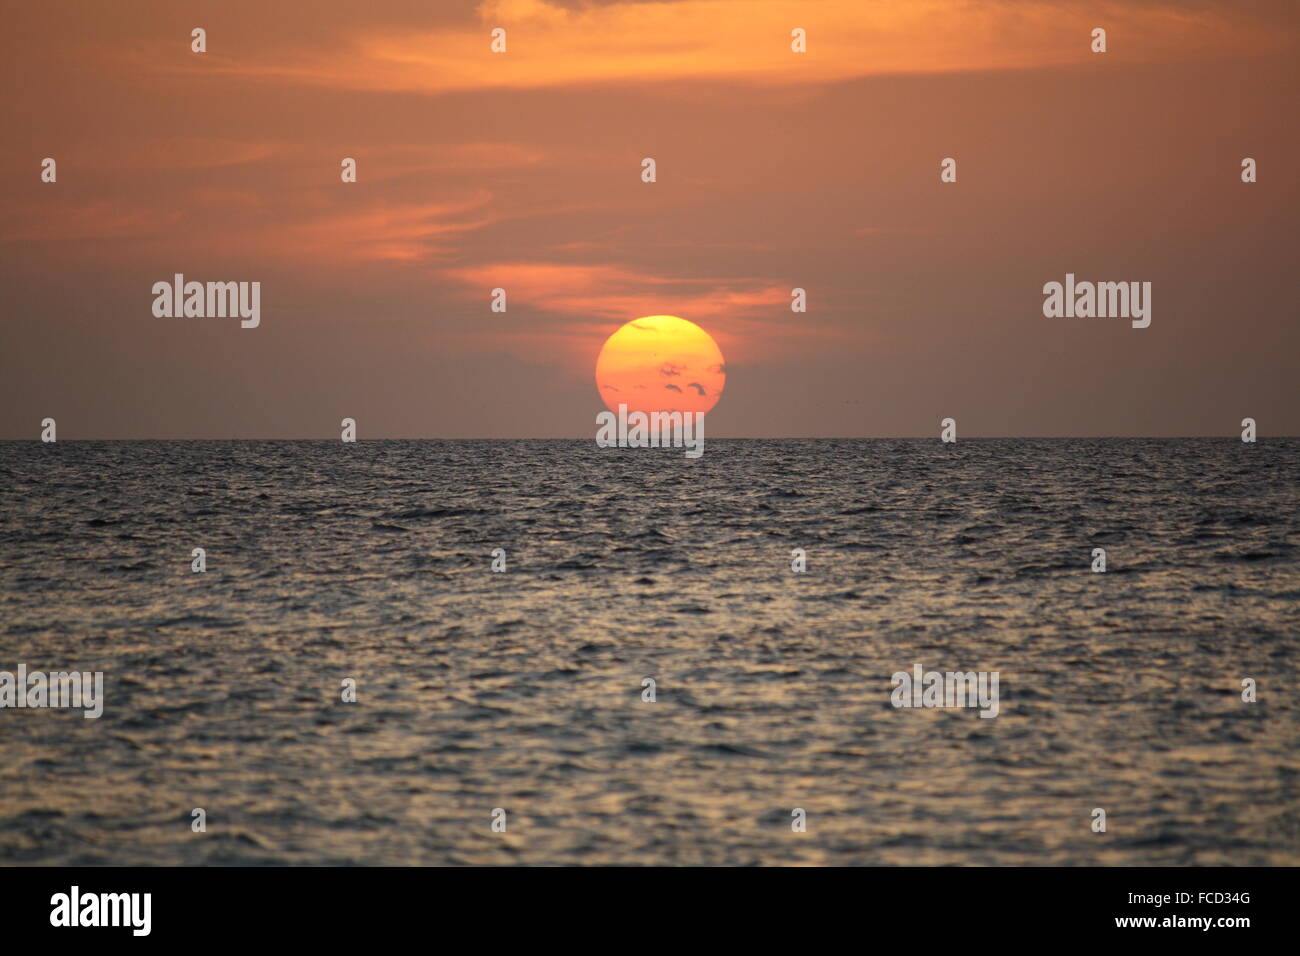 Sunset With A Full Sun At The Sea Stock Photo